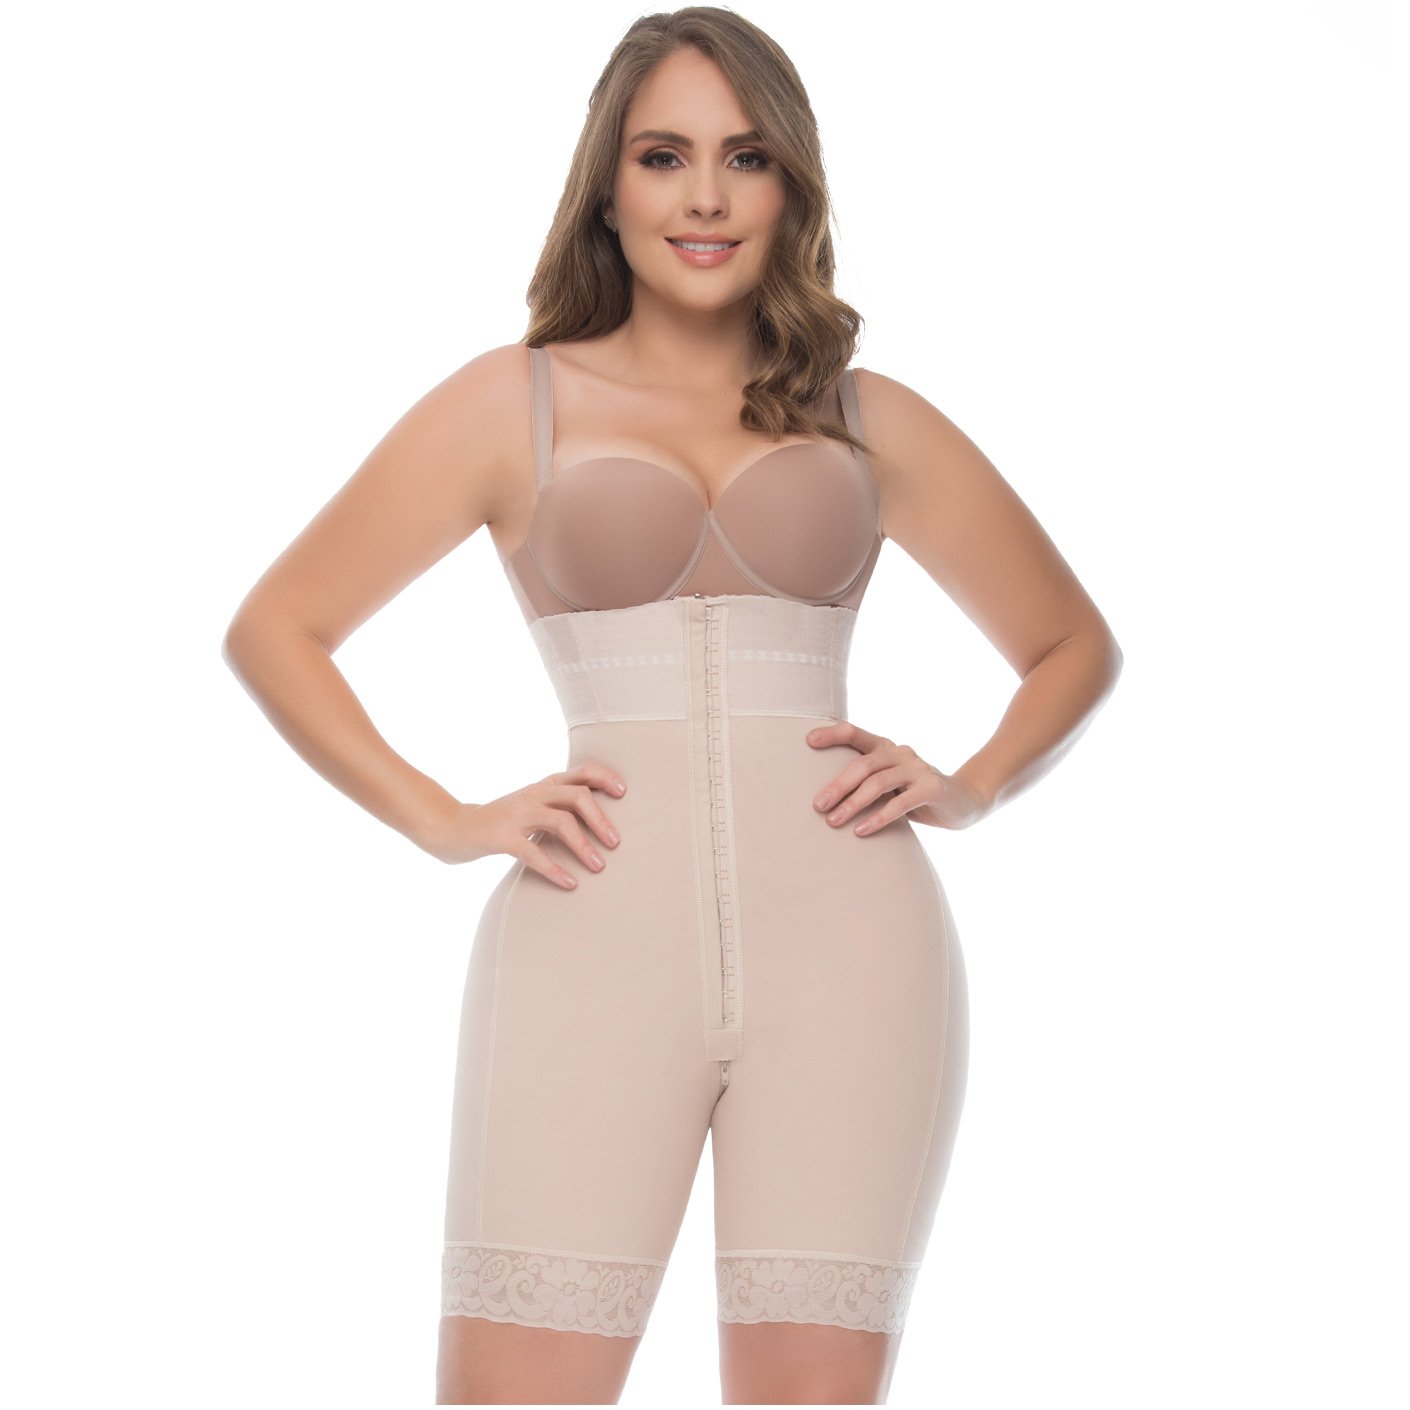 The Ultimate High Compression Shapewear Solution